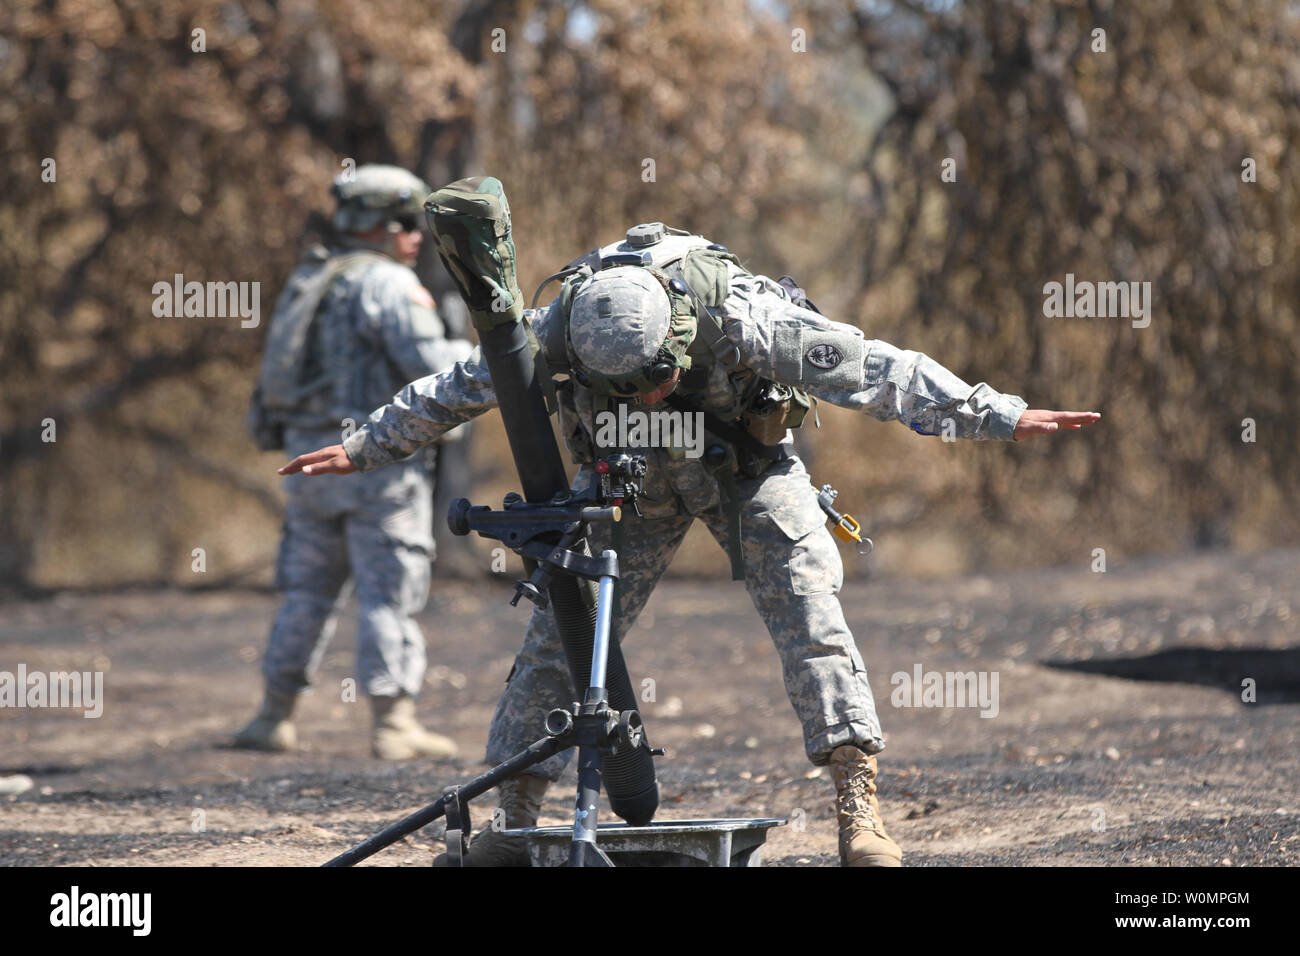 Spc. Jose D. Castro of the Guam Army National GuardÕs mortar platoon, 1st Battalion, 294th Infantry Regiment, signals a partner while properly aligning an 81-M mortar June 12, 2016, at Camp Roberts, Calif., during the 2016 Explorable Combat Training Capability (XCTC) exercise. Photo by Eddie Siguenza/U.S. Army National Guard/UPI Stock Photo